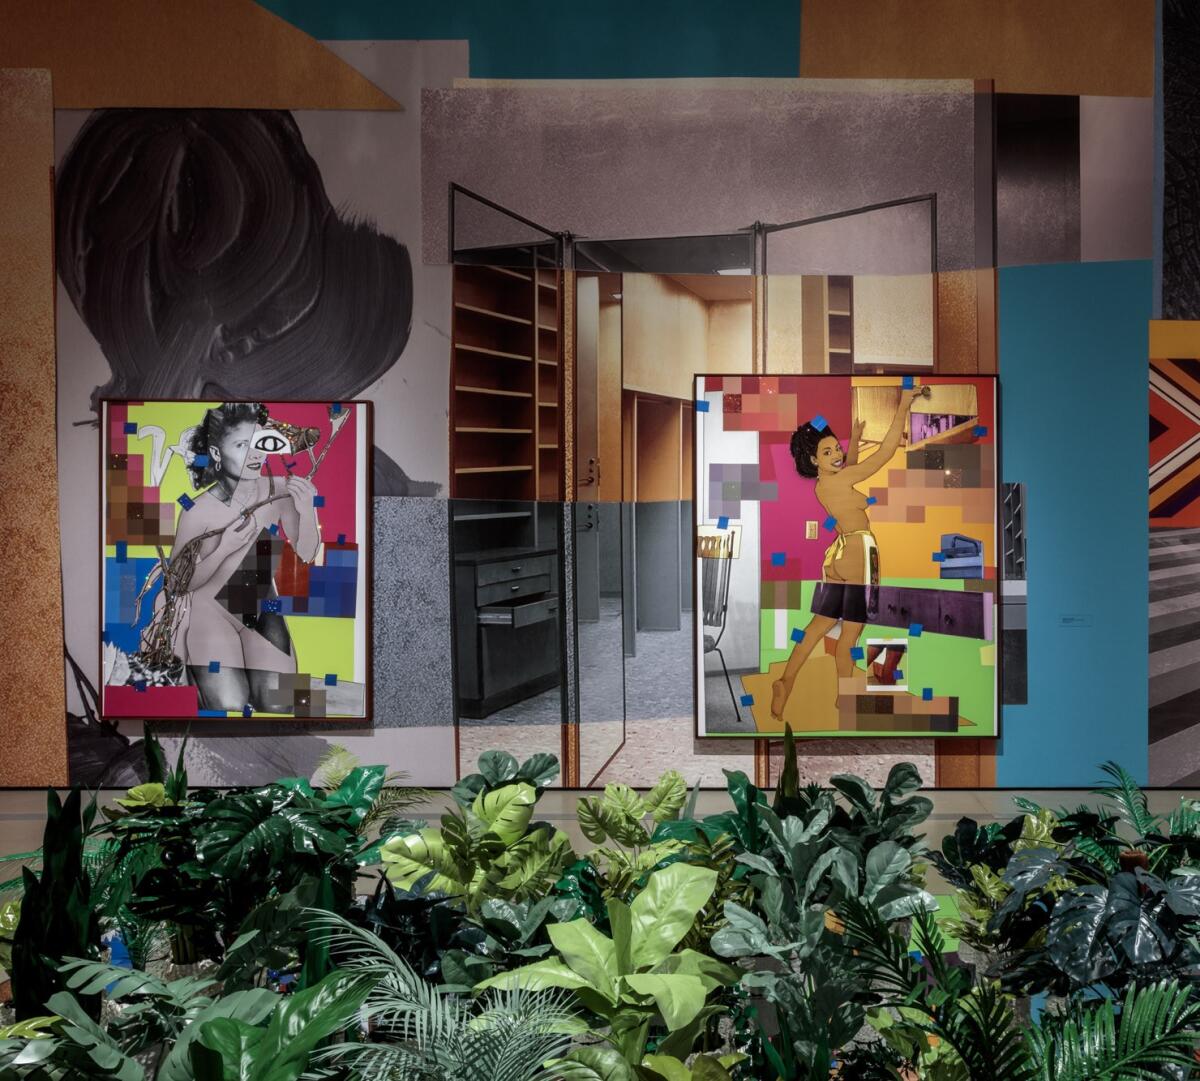 Mickalene Thomas installed pin-up paintings on a photo blow-up of an empty closet